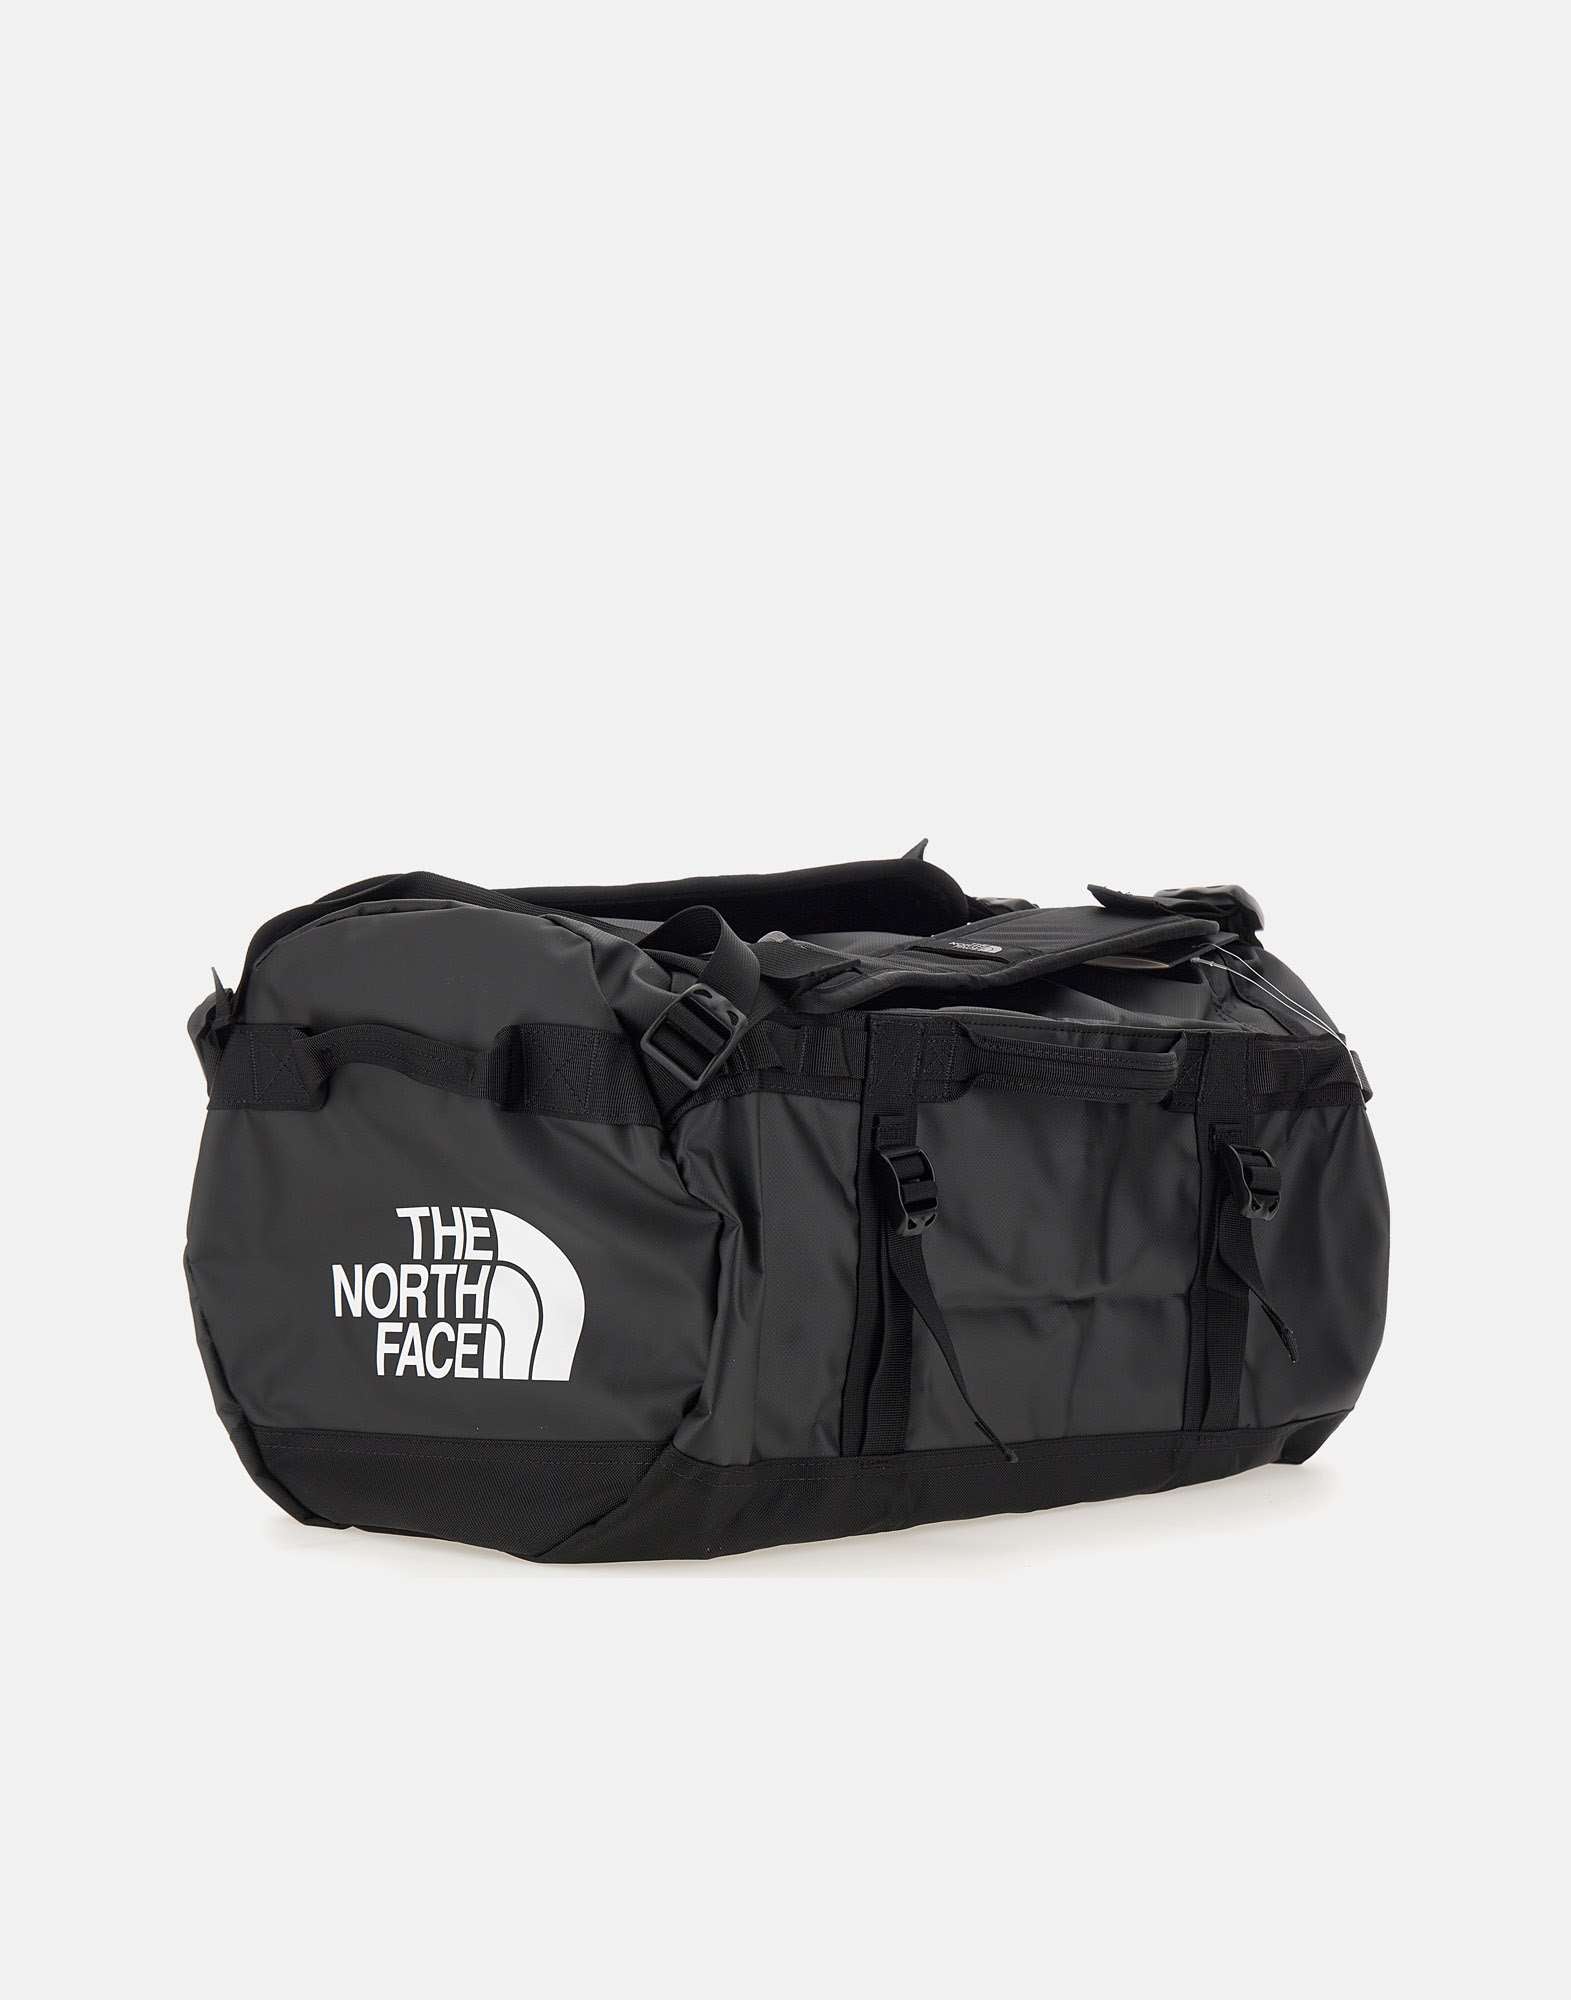 THE NORTH FACE NF0A52ST Man Black Suitcases - Zuklat